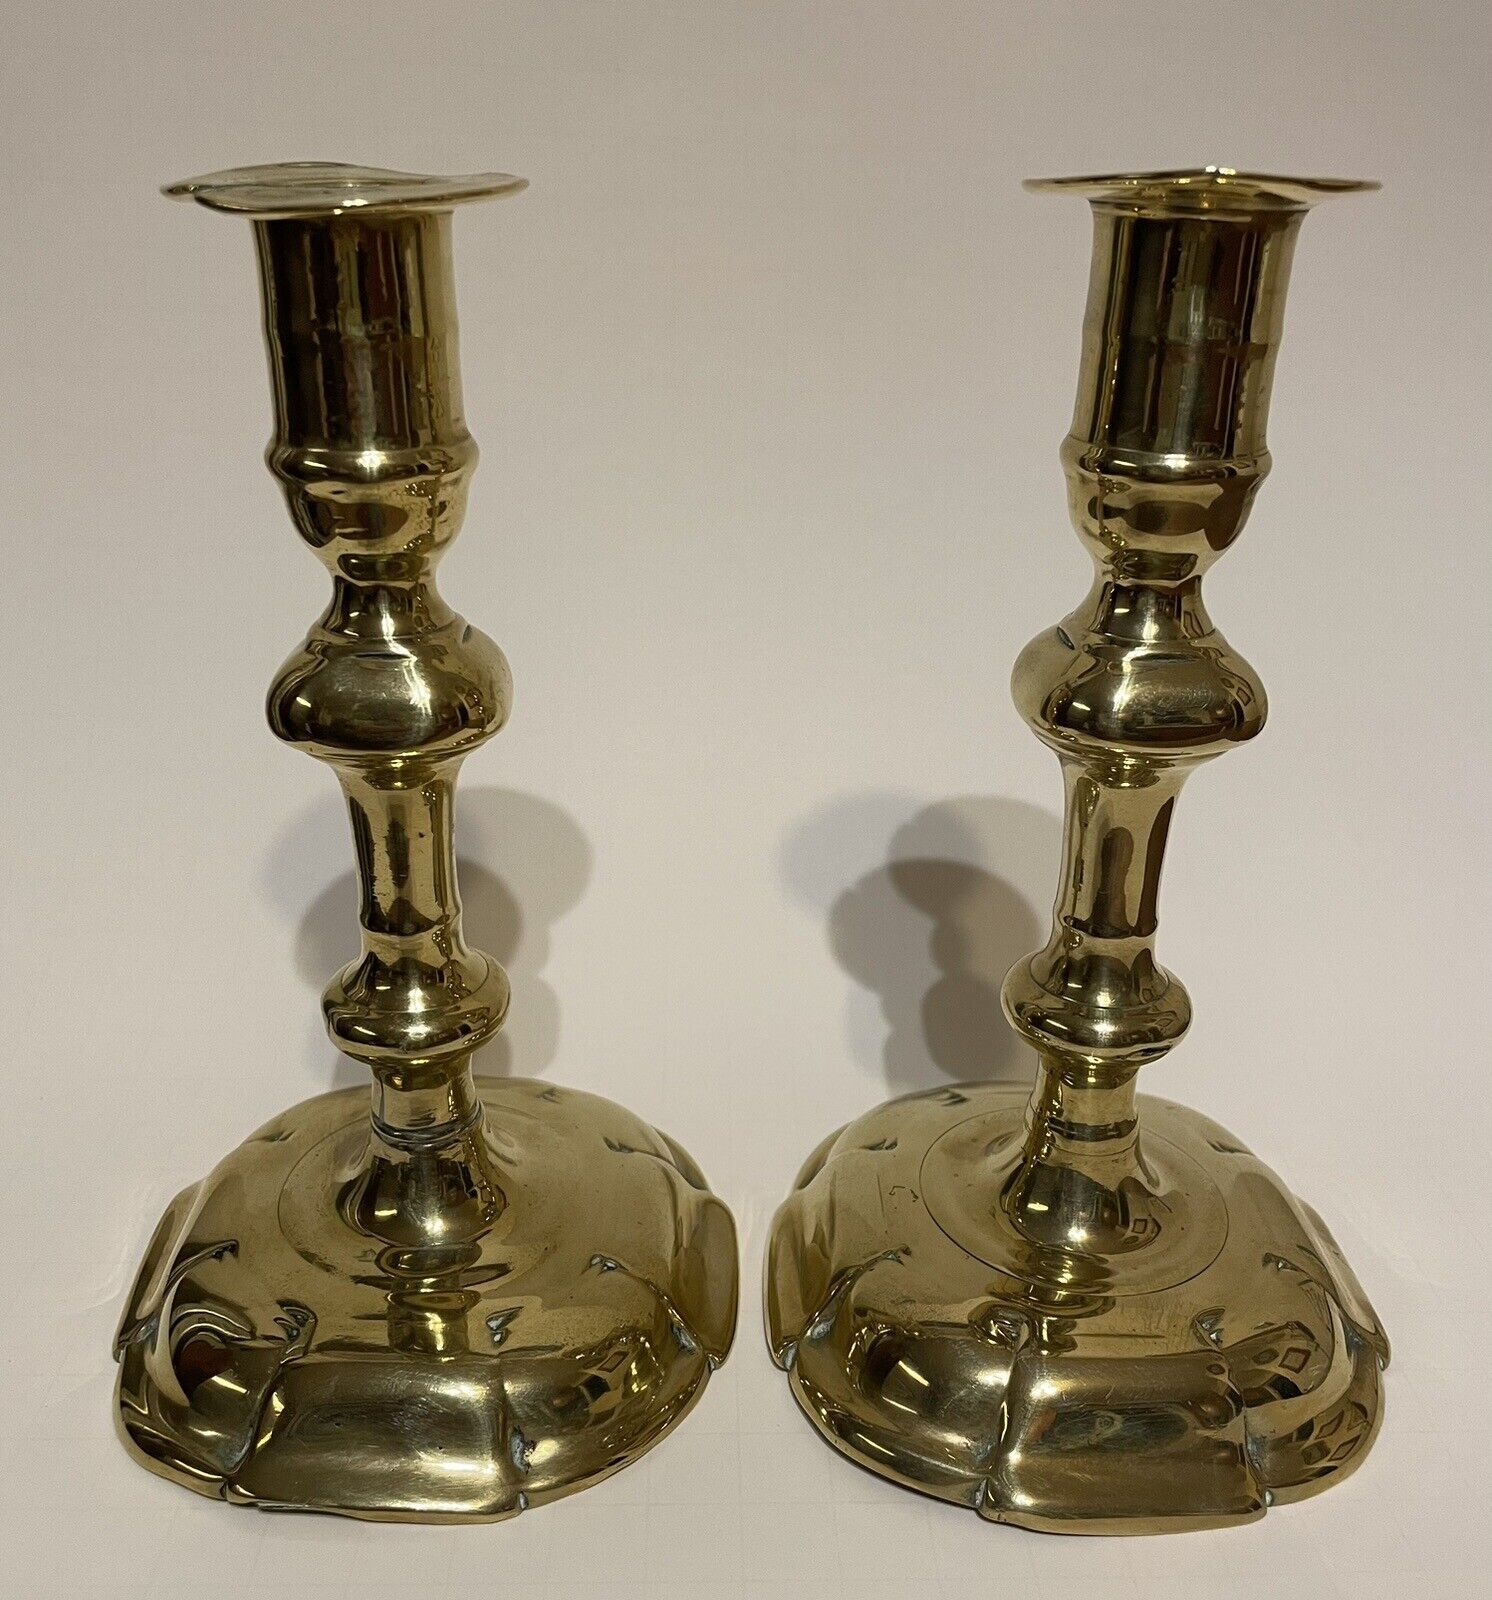 Pair of mid-18th c. ca. 1750 brass candlesticks, likely English